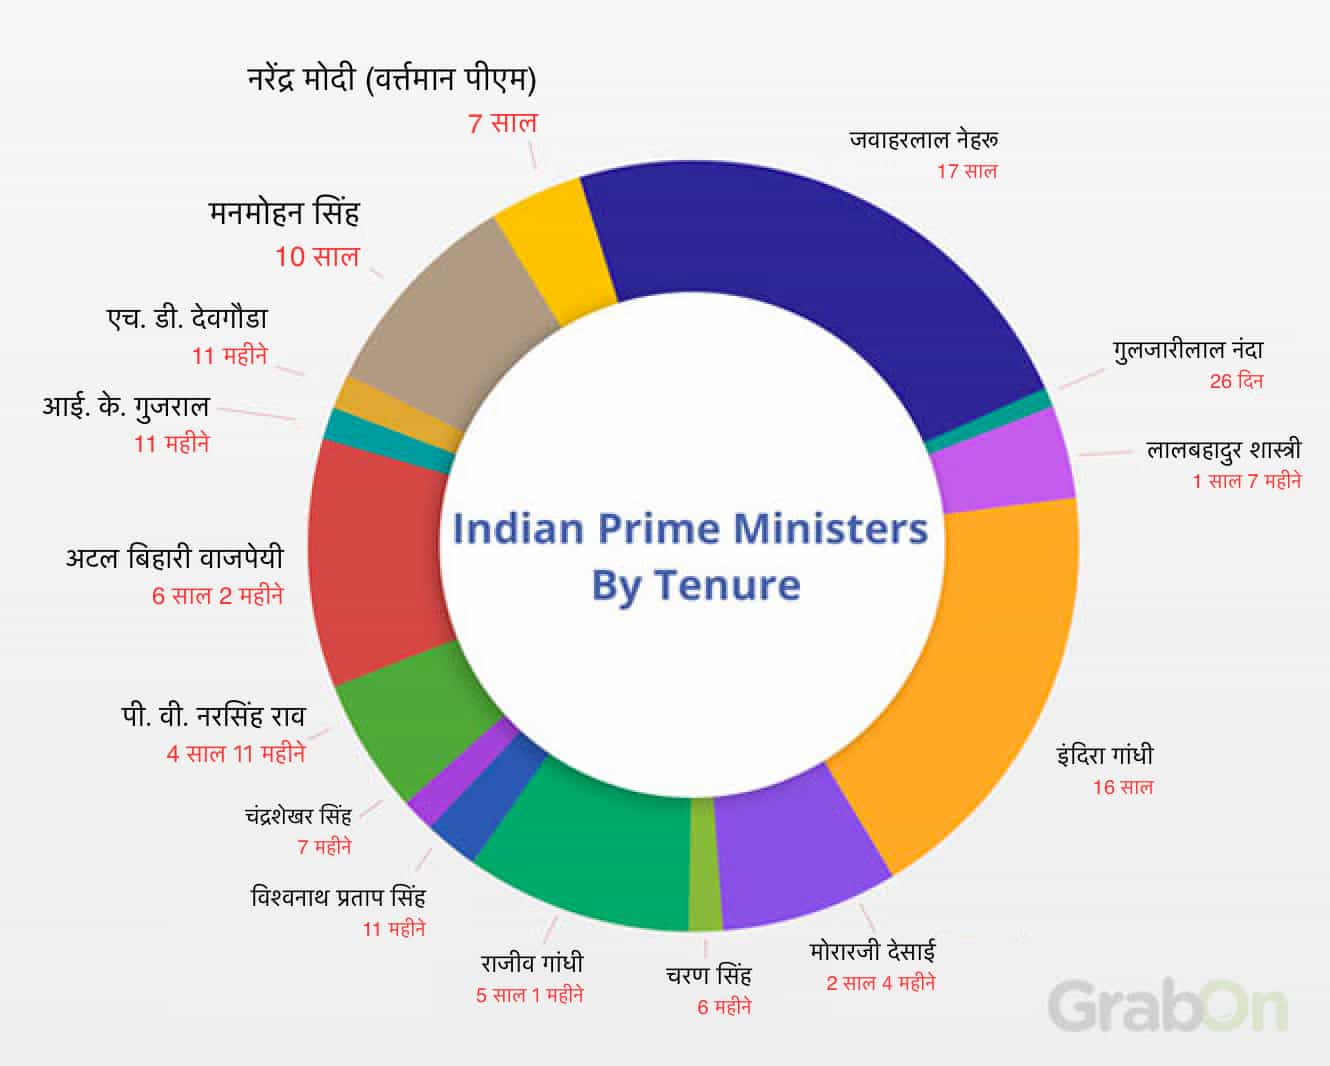 Indian Prime Ministers By Tenure